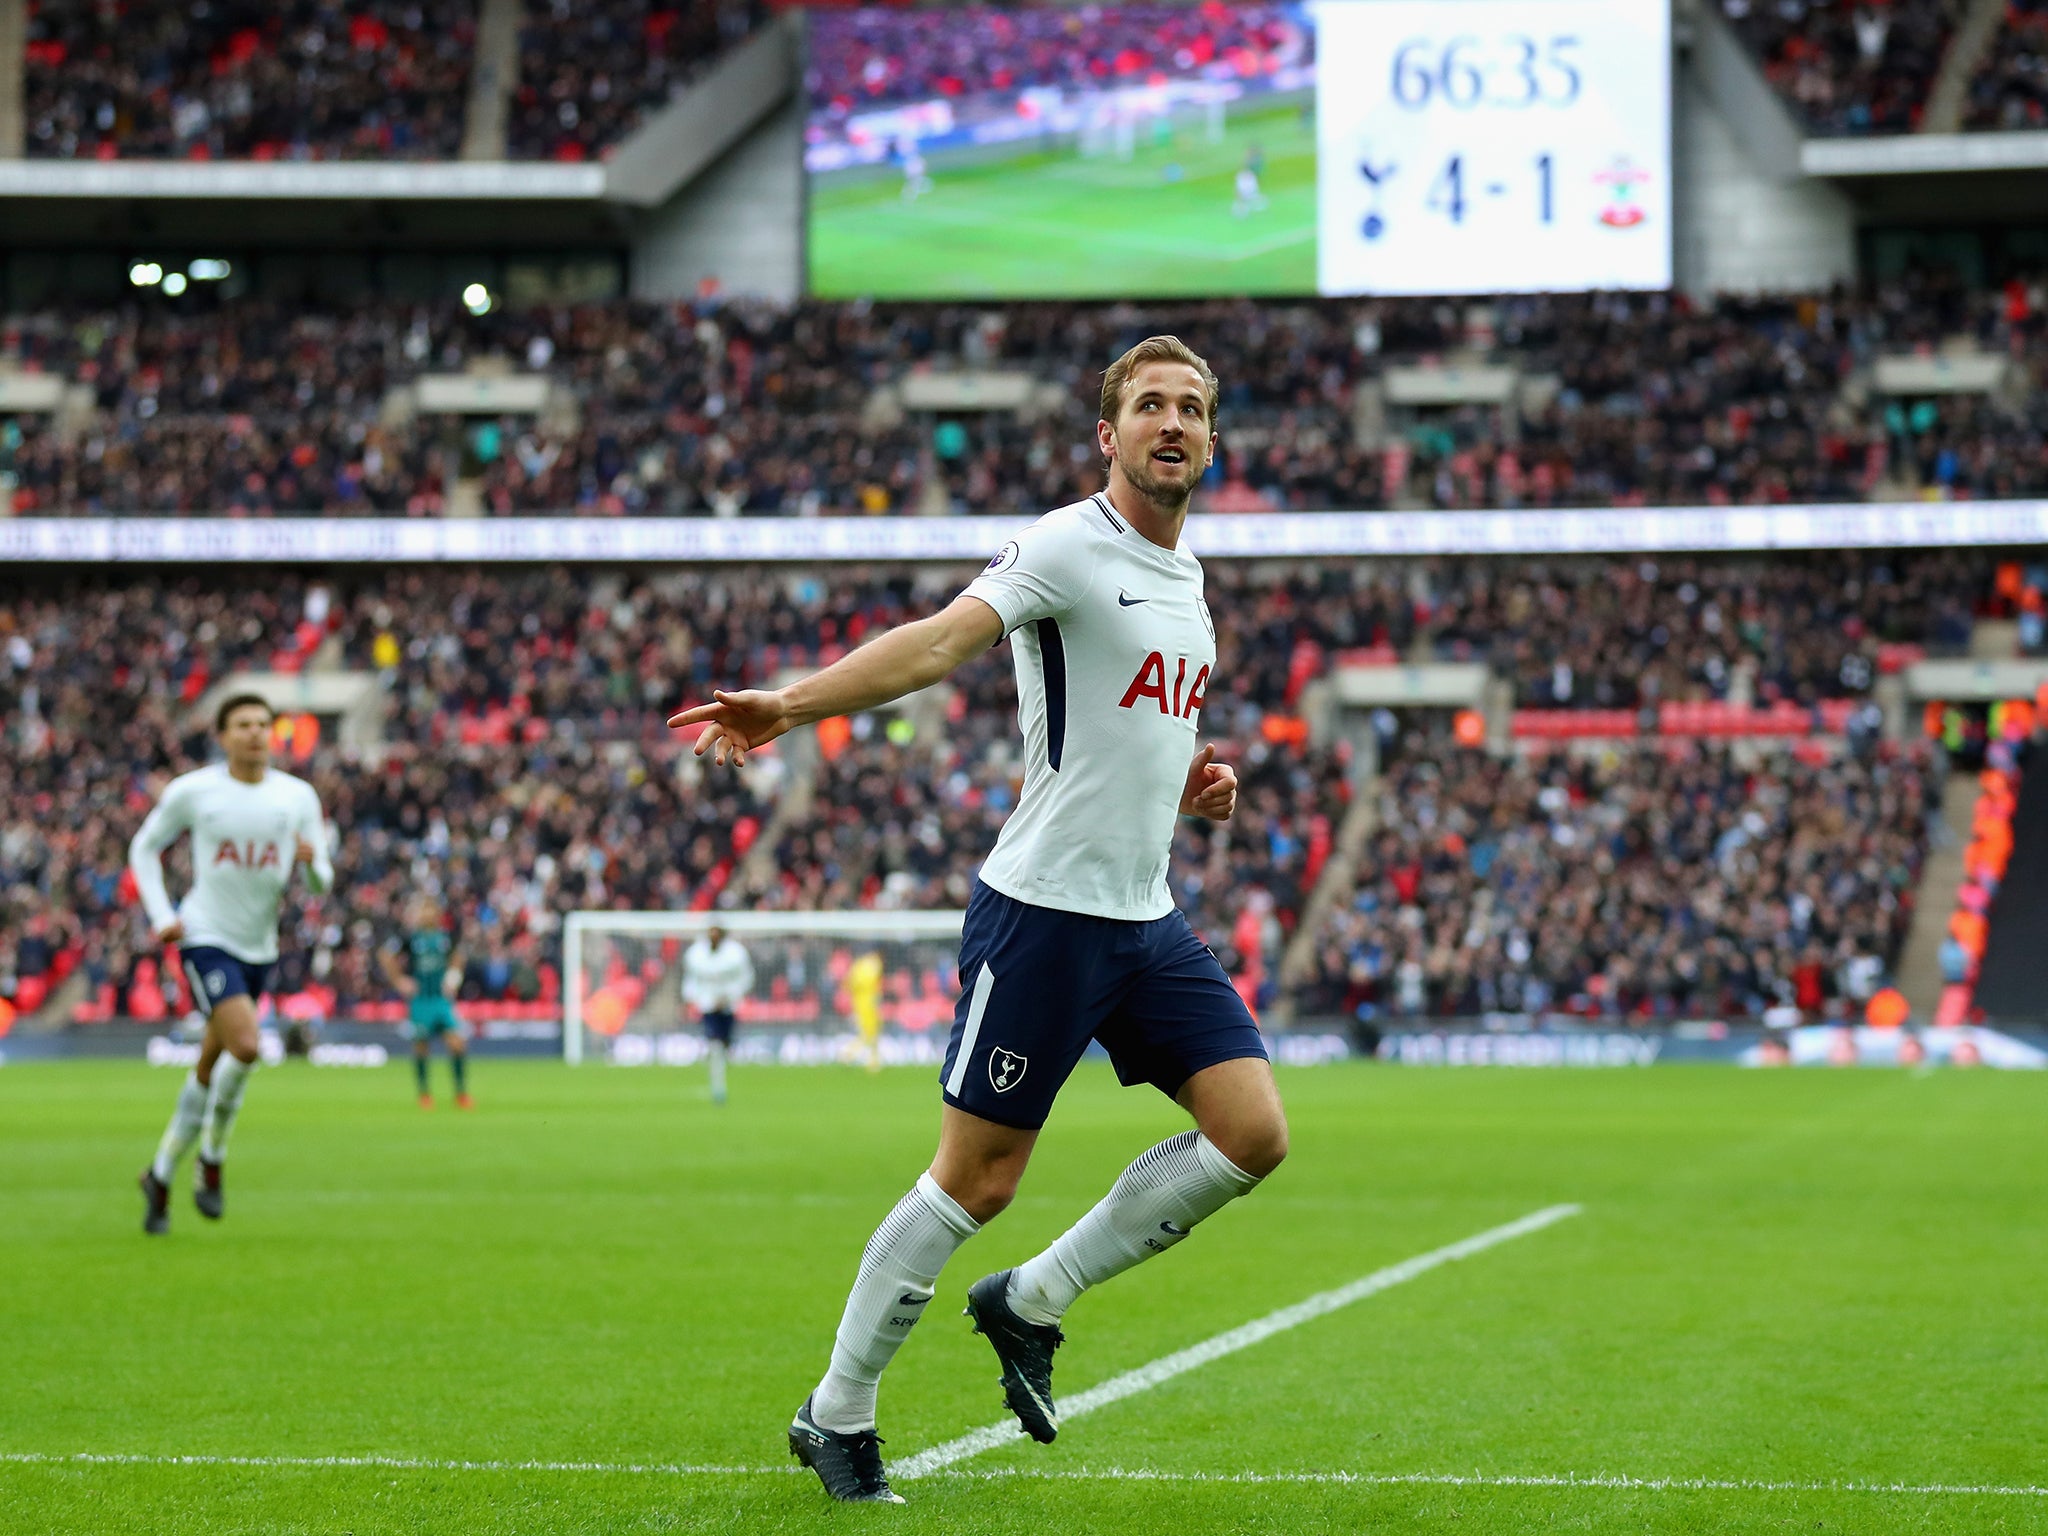 Harry Kane scored his eighth hat-trick of 2017 in the 5-2 thrashing of Southampton